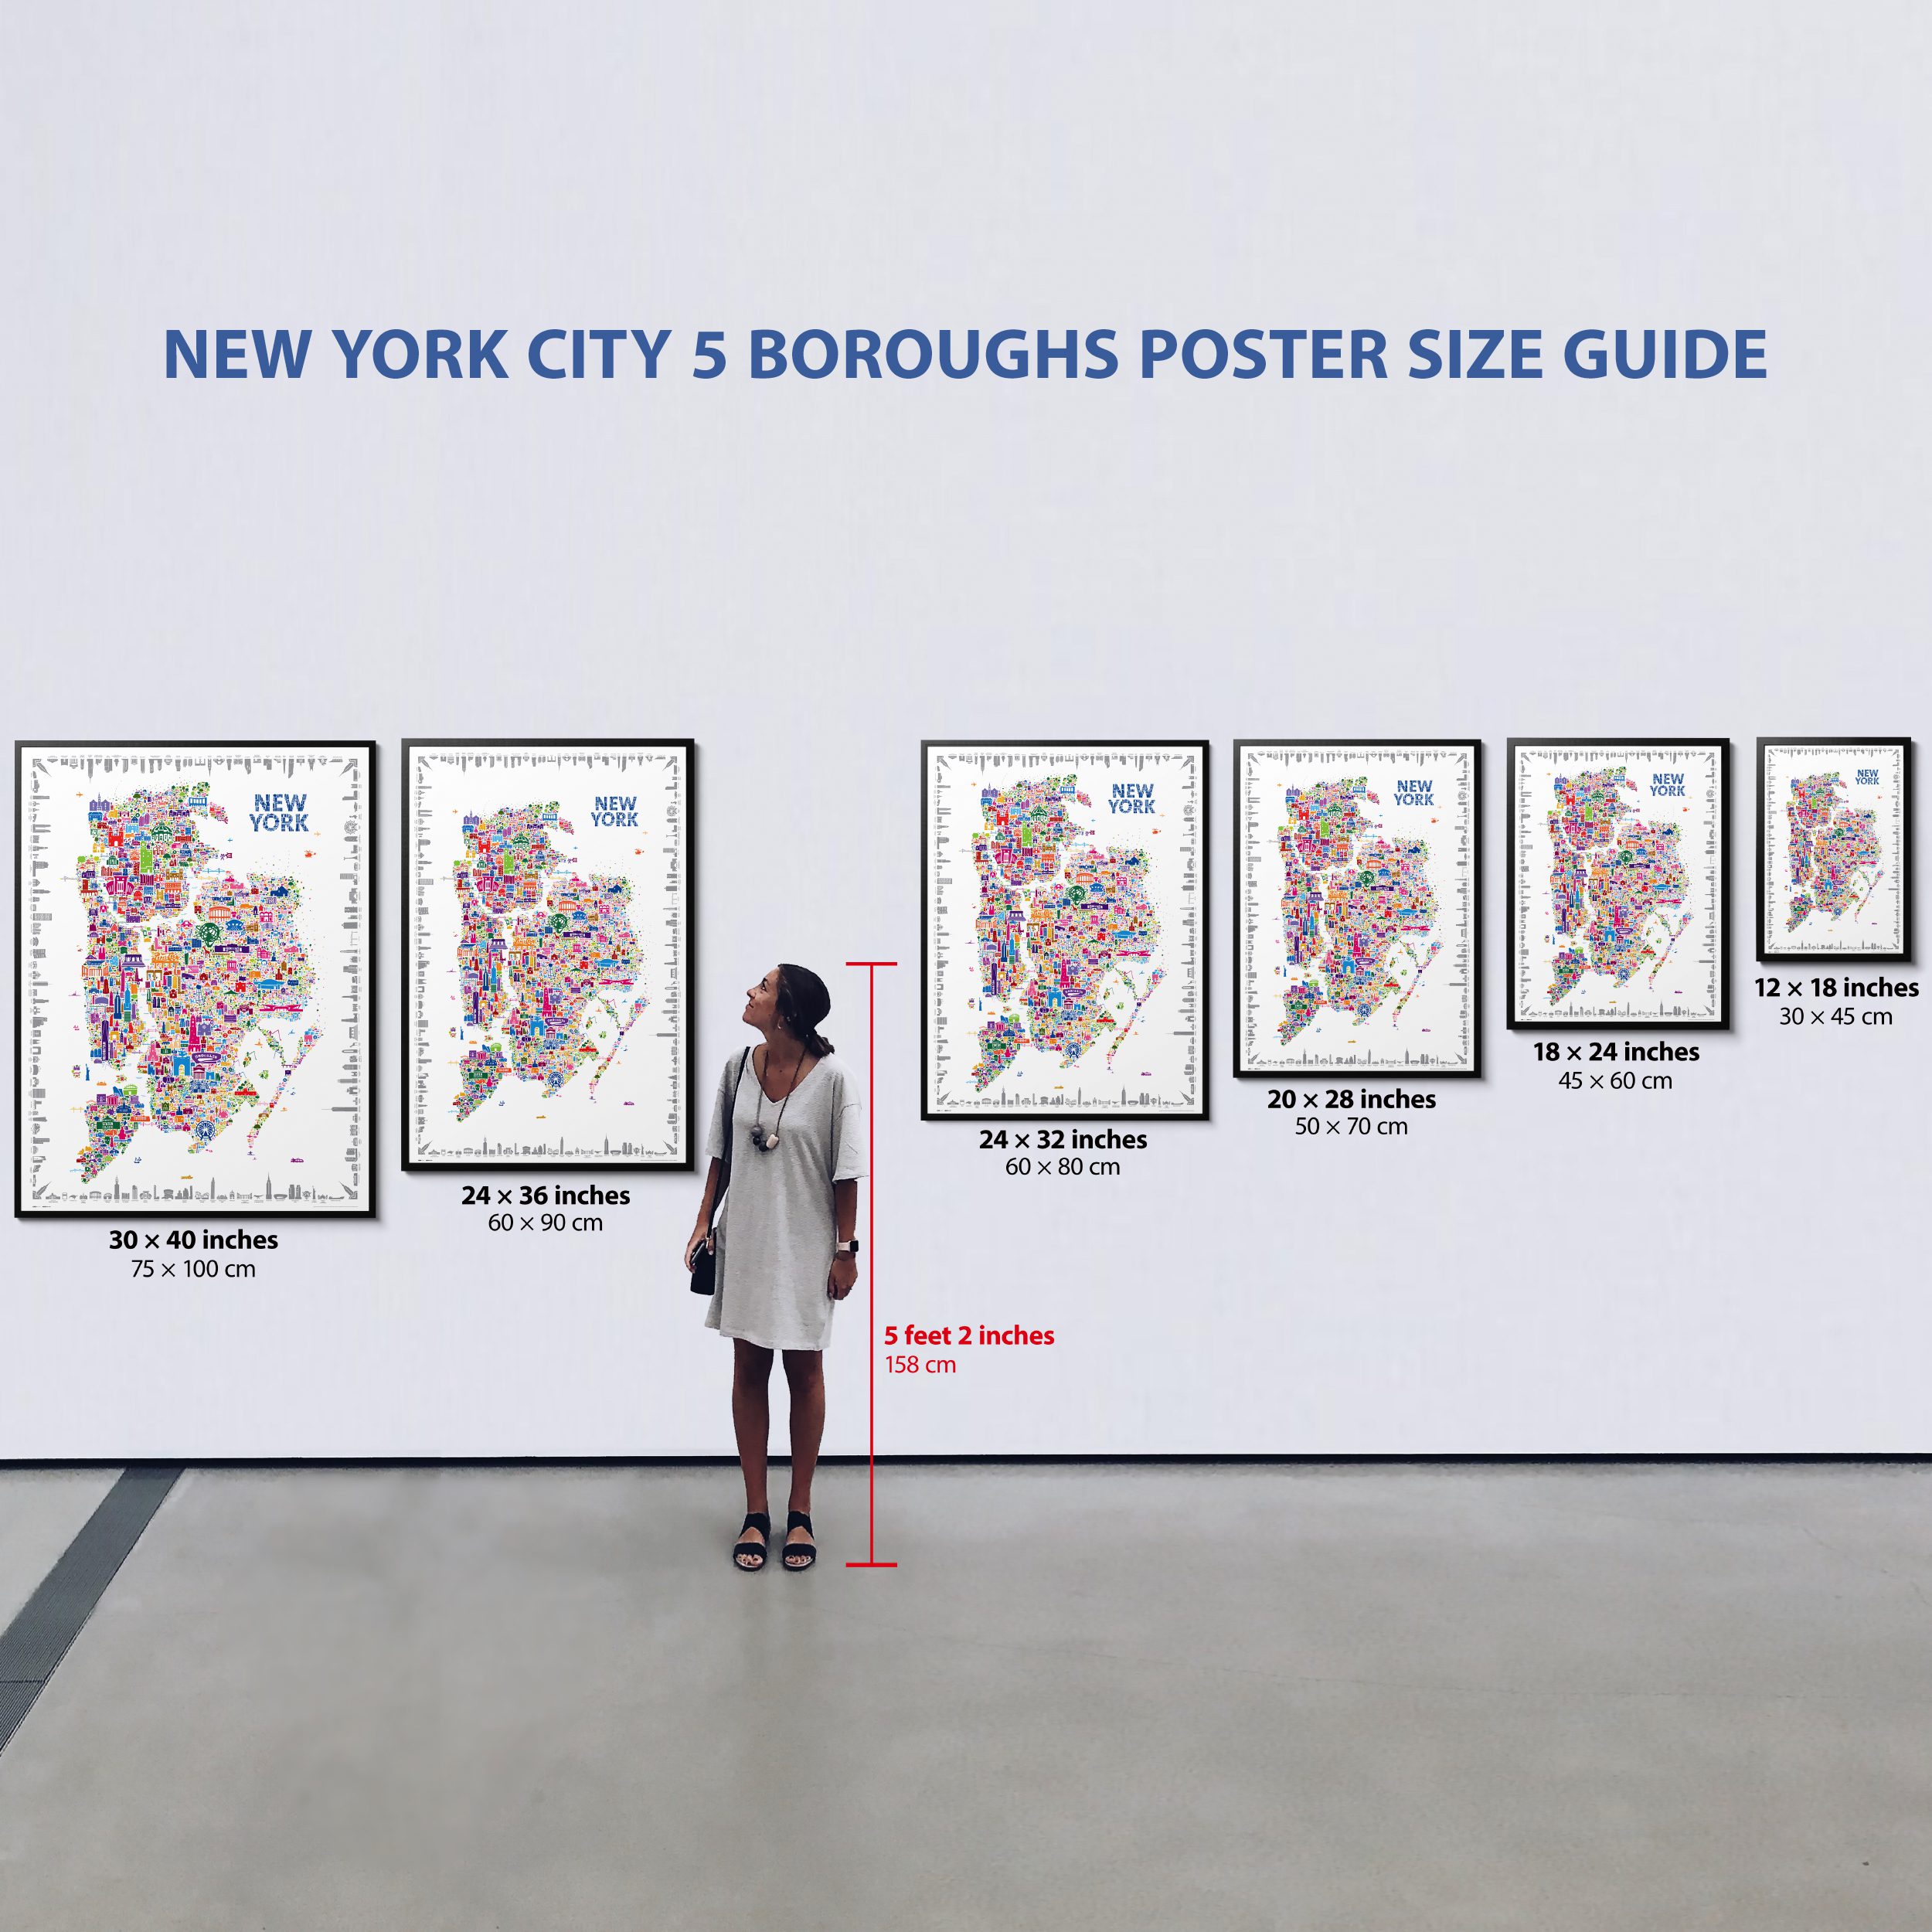 Alfalfa New York Iconic NYC five boroughs Poster Artwork For Home office bedroom Walls Designer Wall Art of Trendy Colorful NY Map City Fashion Decor Travel Posters Maps Gift modern Souvenir Paper Prints bronx brooklyn manhattan queens staten island